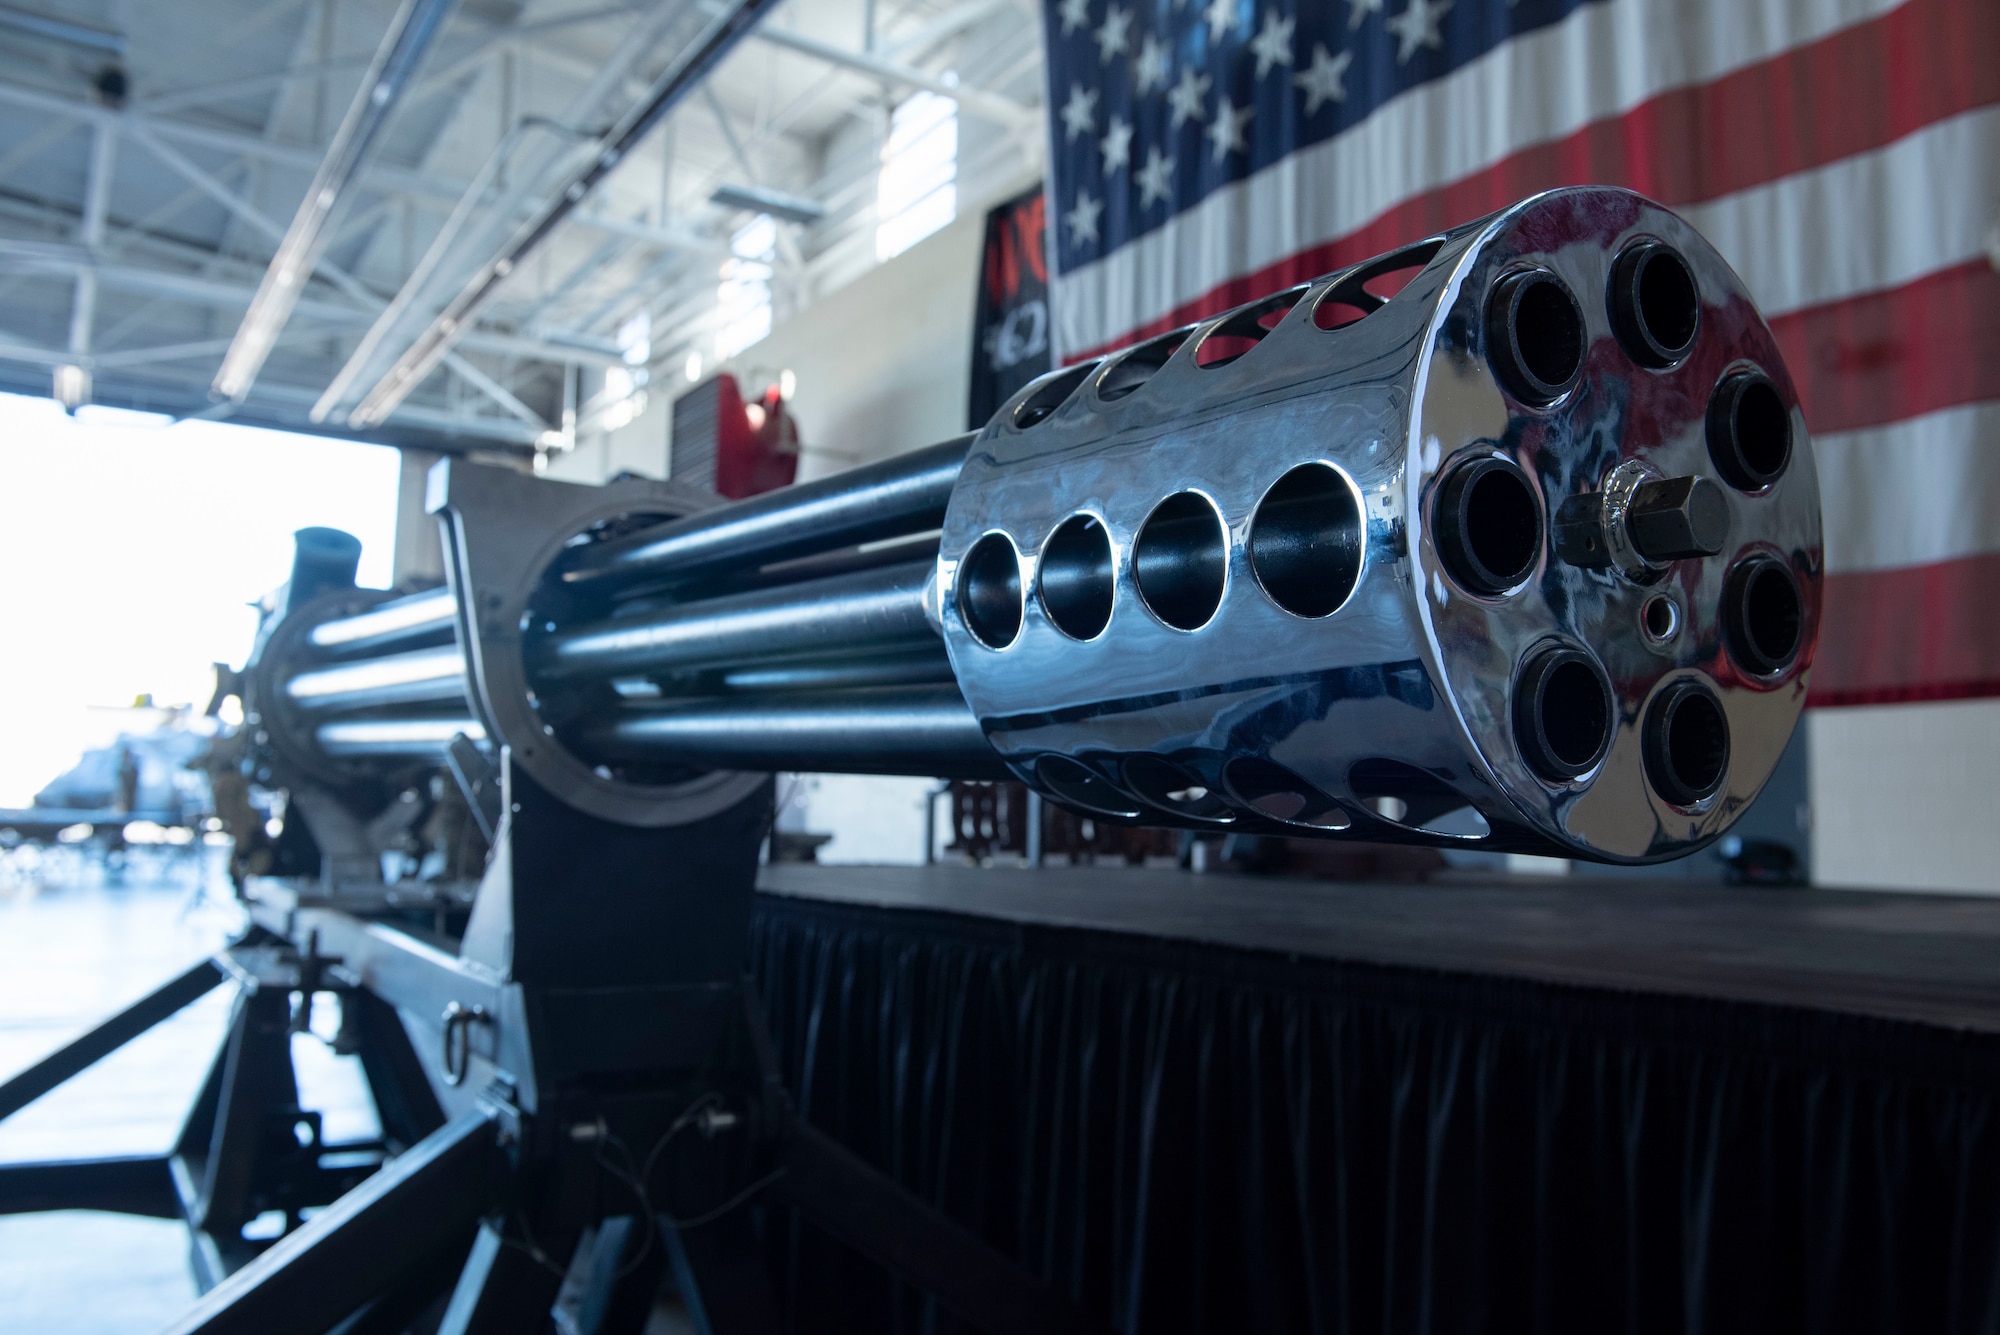 A stylized GAU-8 Avenger 30mm gatling gun rests in front of the presentation stage during the Maintenance Professional of the Year awards banquet at Moody Air Force Base, Georgia, March 25, 2022. Maintenance Airmen maintain, arm, and ensure readiness for U.S. Air Force aircraft. (U.S. Air Force photo by Senior Airman Thomas Johns)